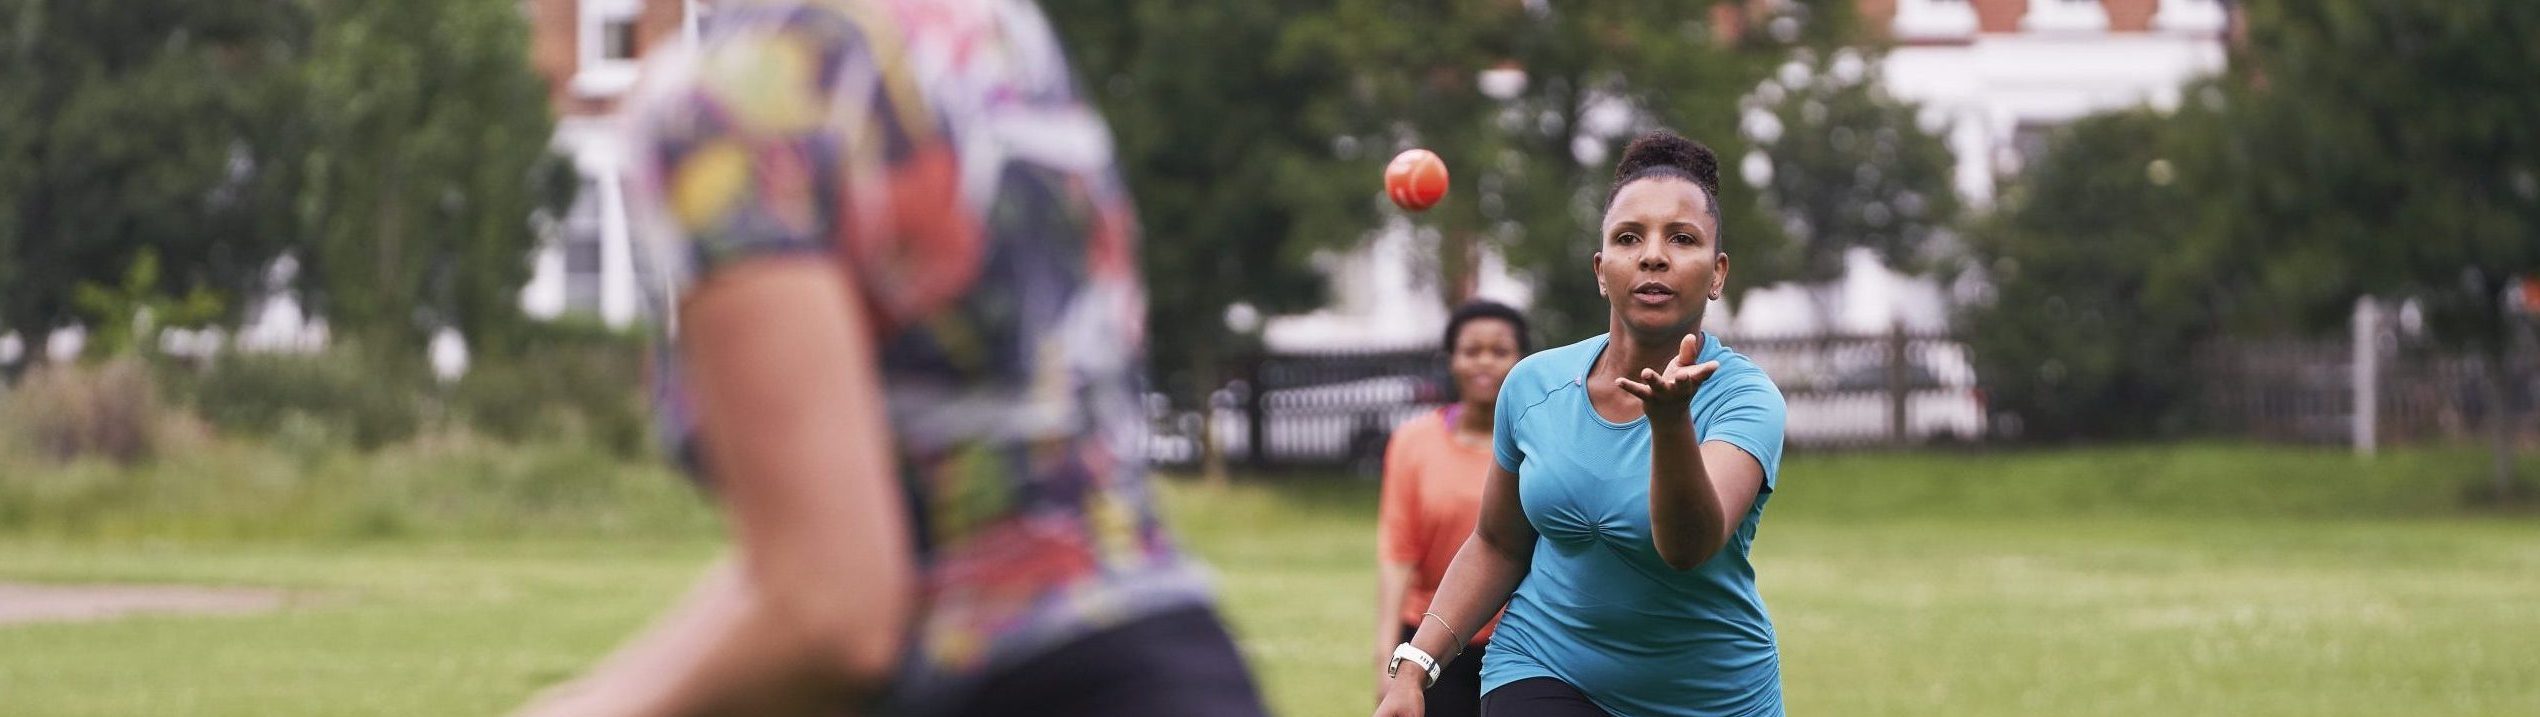 A black woman aged 40-45 throwing a ball